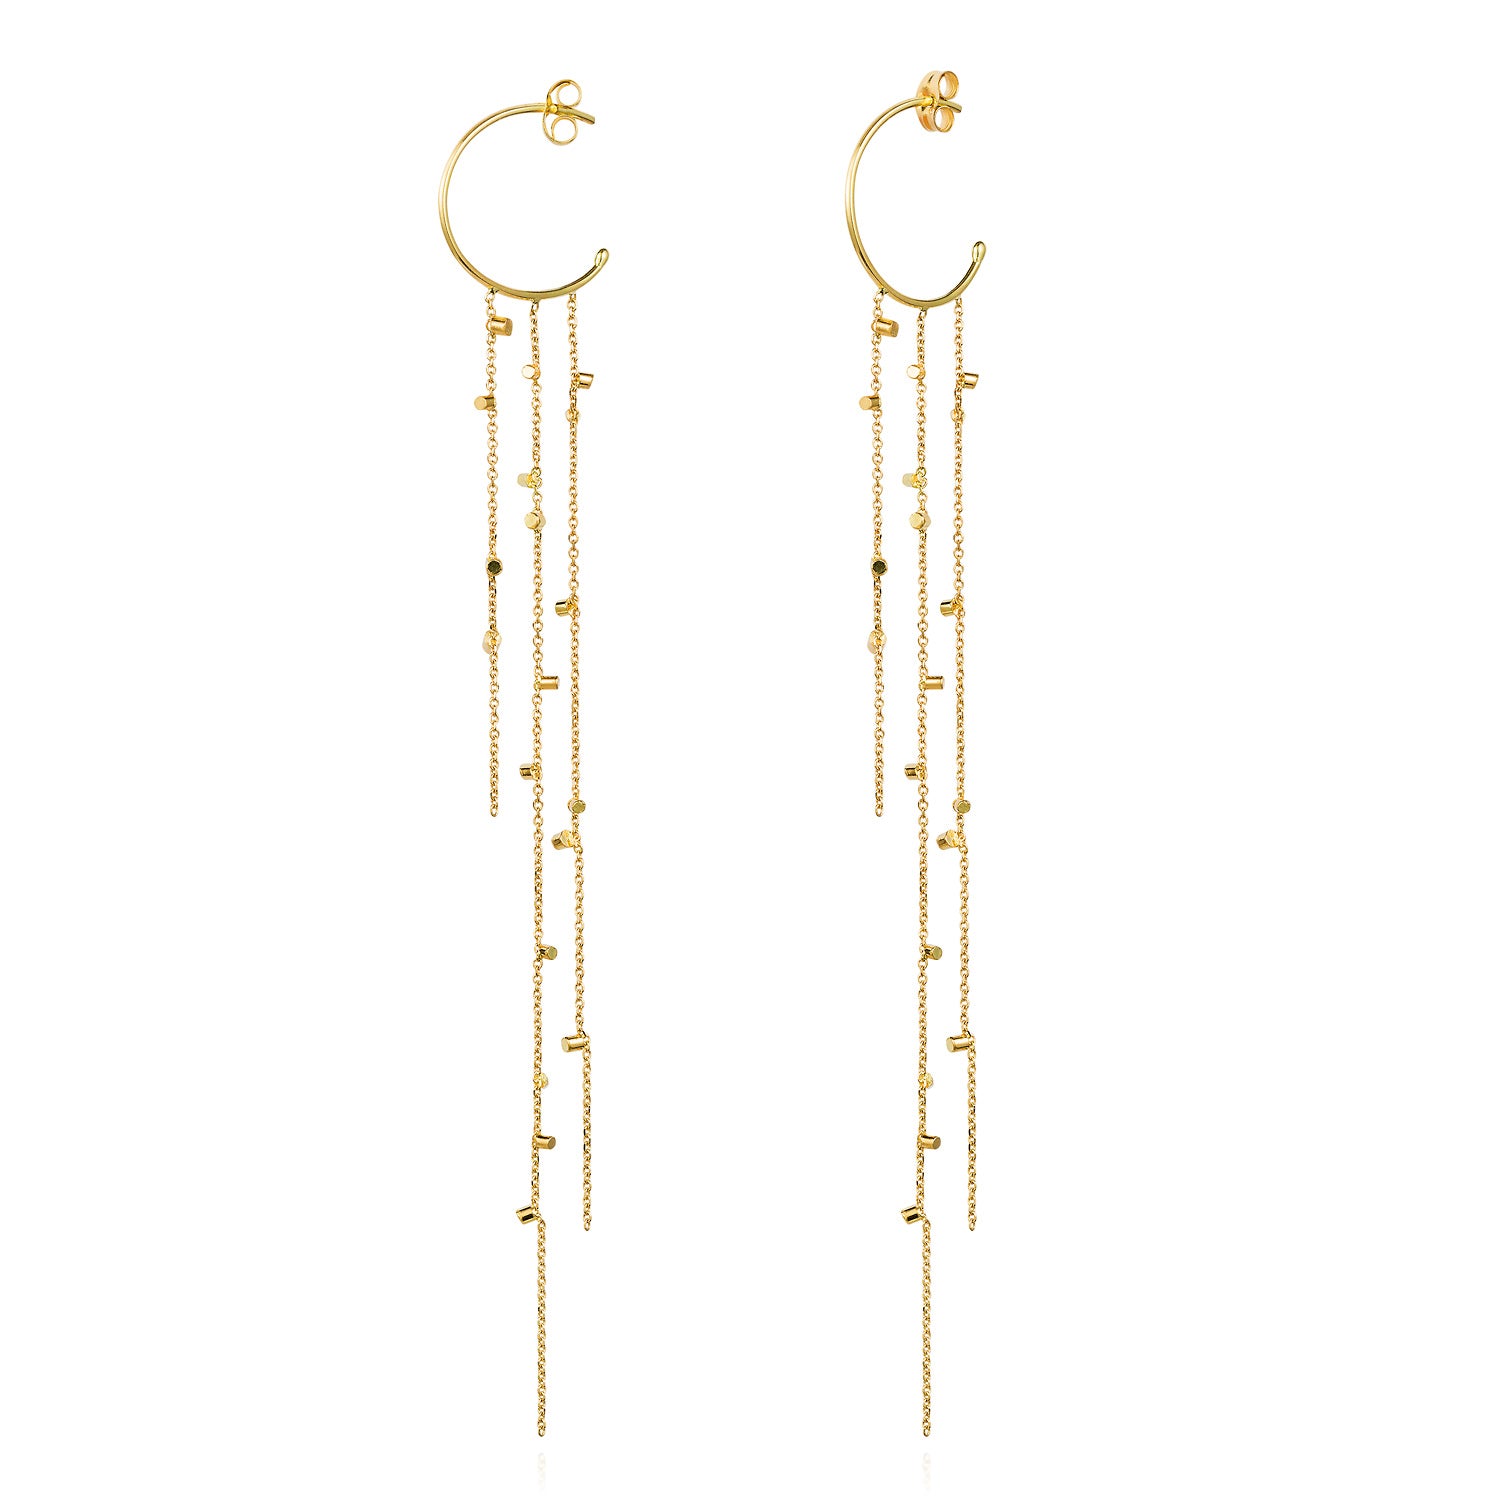 These fabulous hoop earrings are part of our Gold Dust Collection. The Hoops have three strands of 18ct yellow fine chain sprinkled with a shimmering of gold embellishments